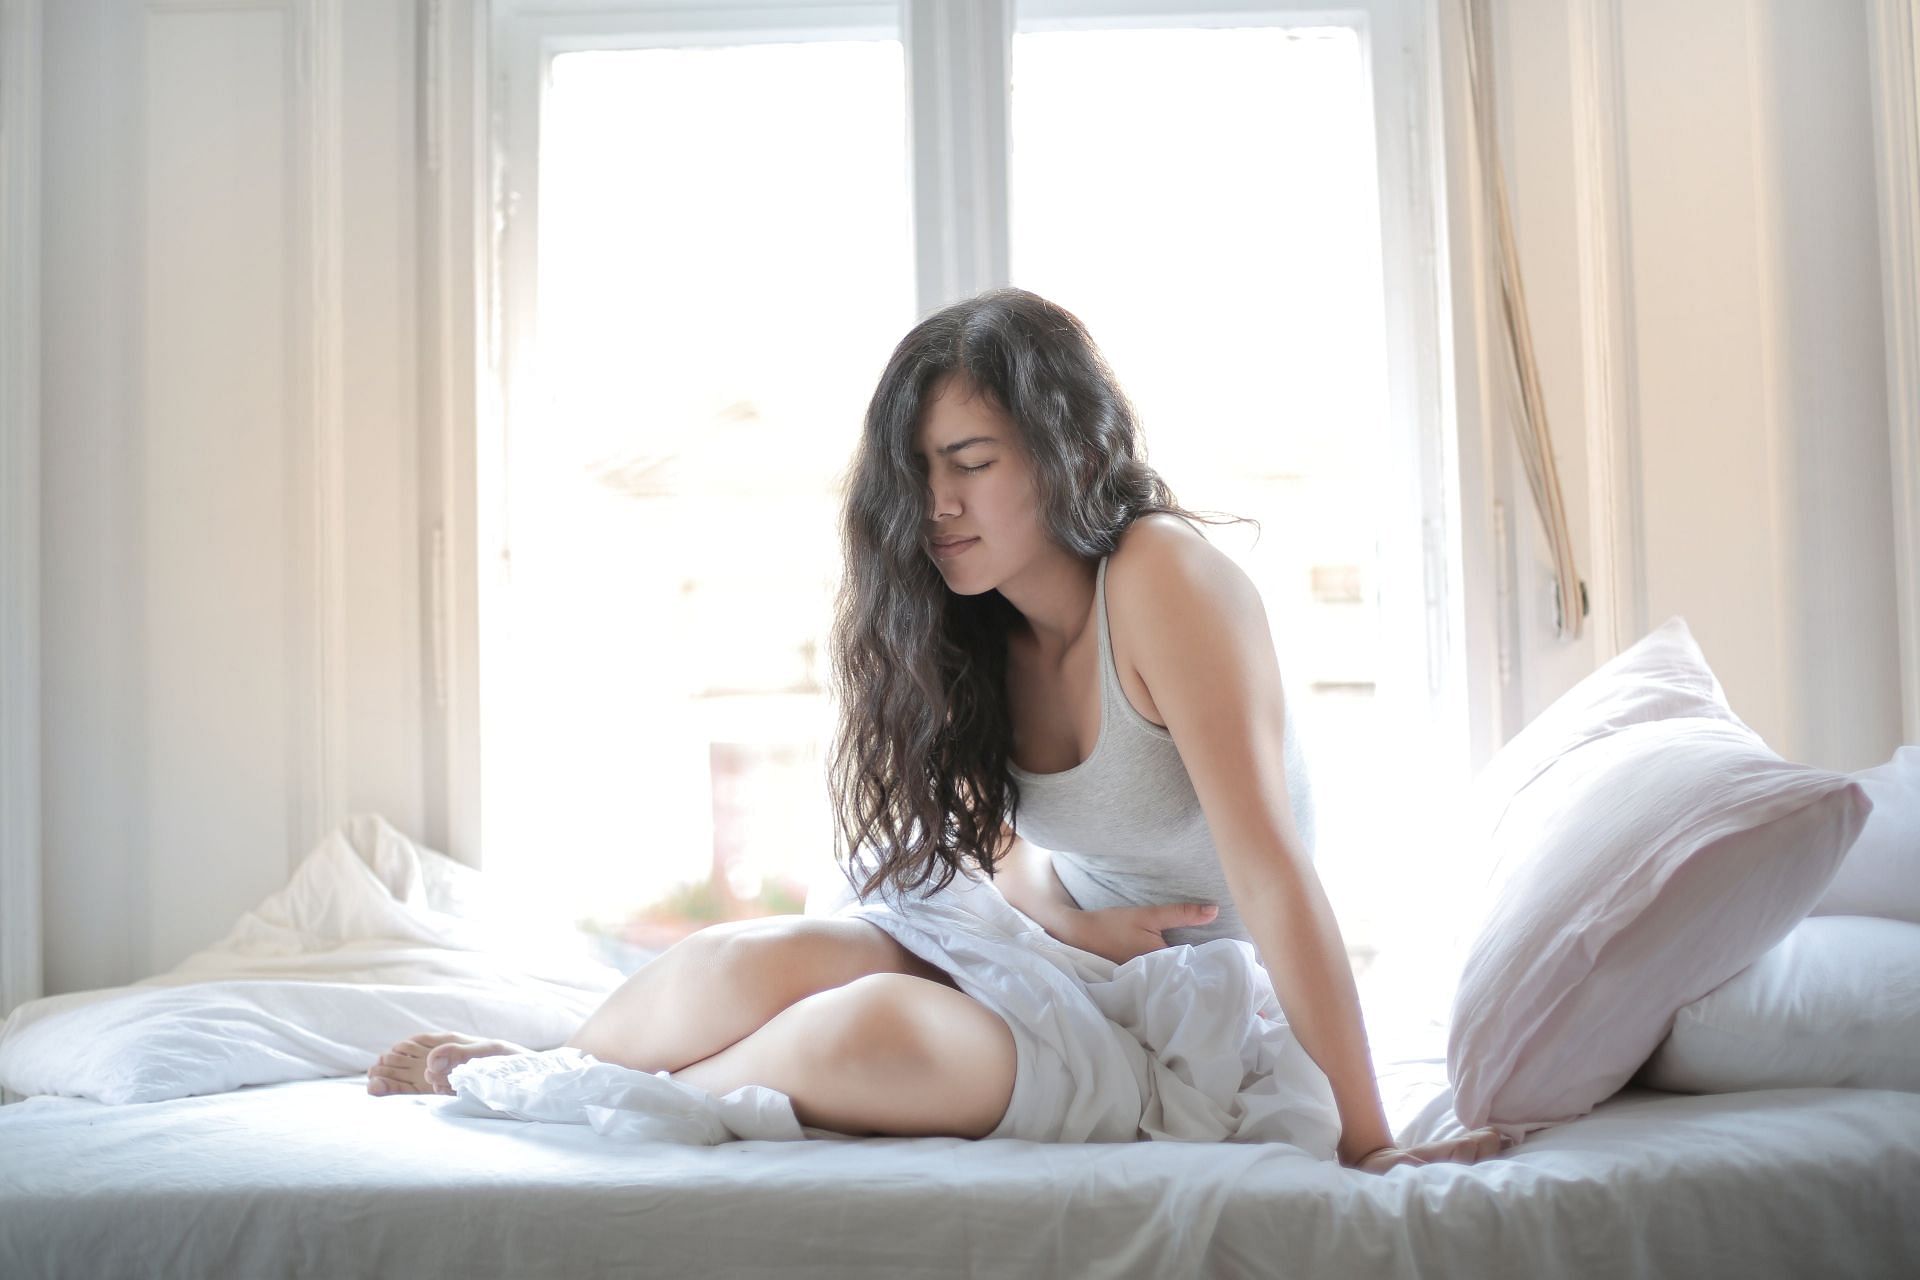 Importance of relieving menstrual cramps (image sourced via Pexels / Photo by andrea)